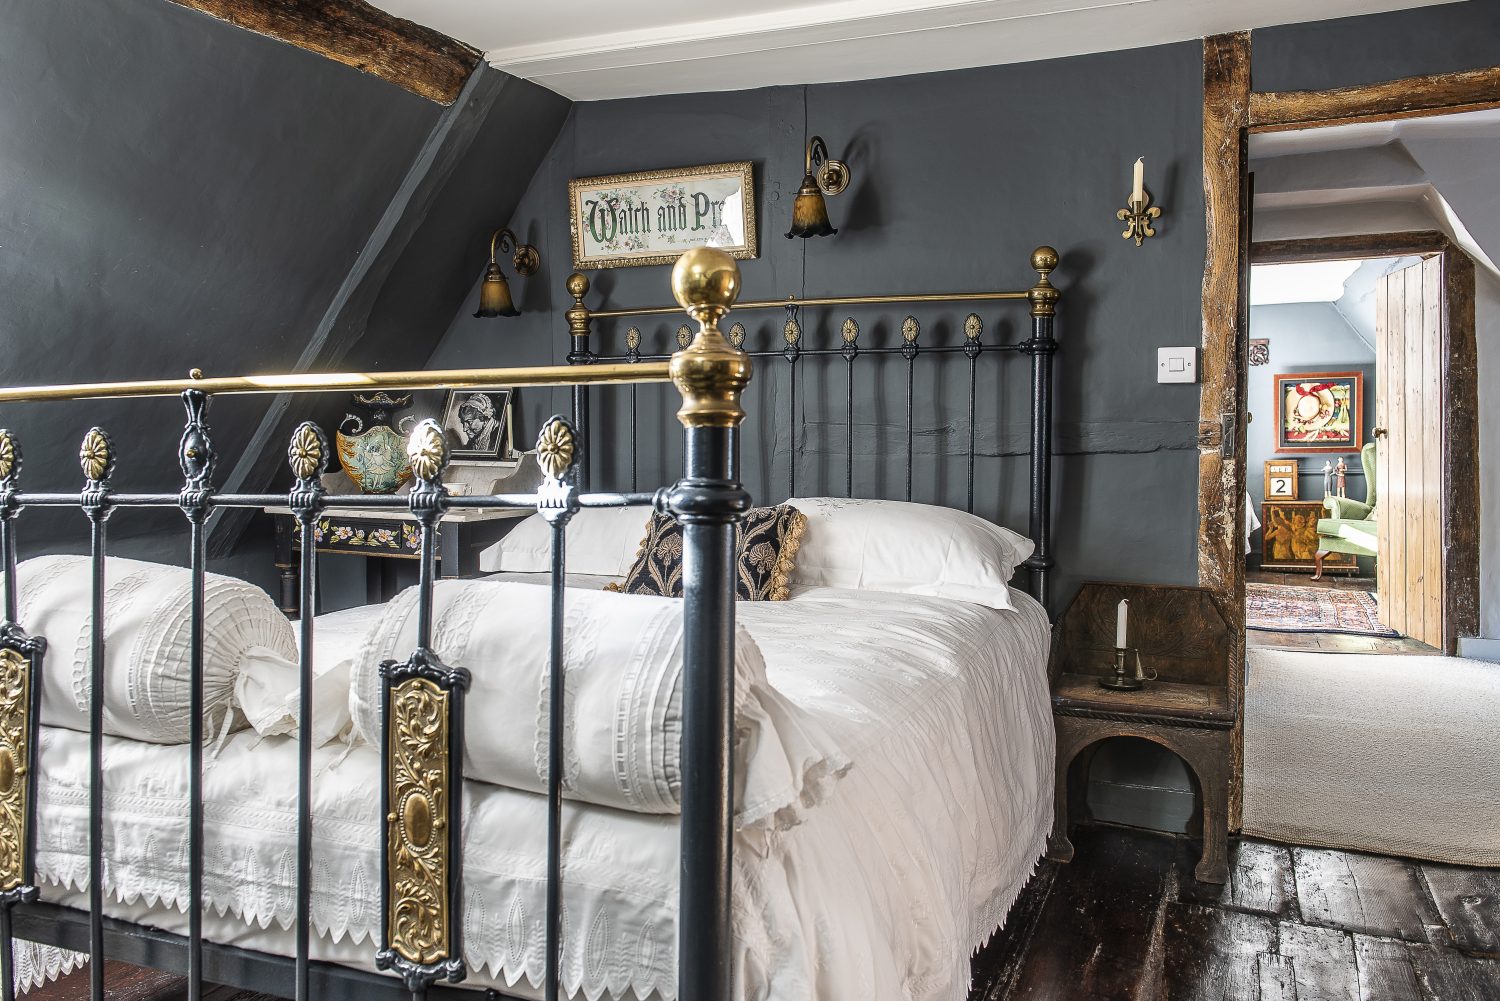 The attic bedrooms have a darker, more historic fee